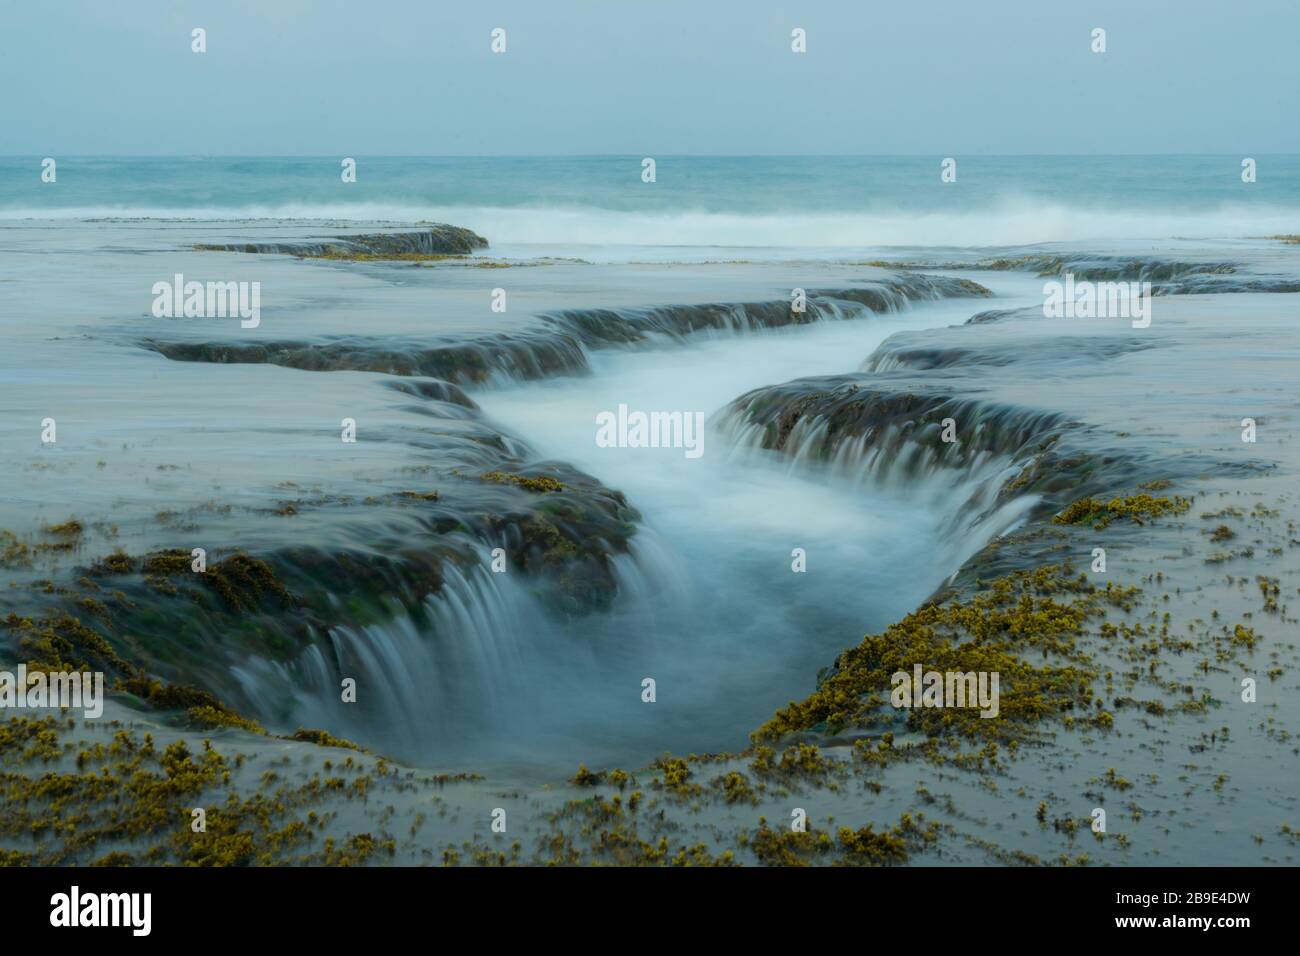 Unique ocean water flow through rocks phenomenon like a waterfall. Perfect location for photographers near Sawarna, Banten province, Java, Indonesia Stock Photo